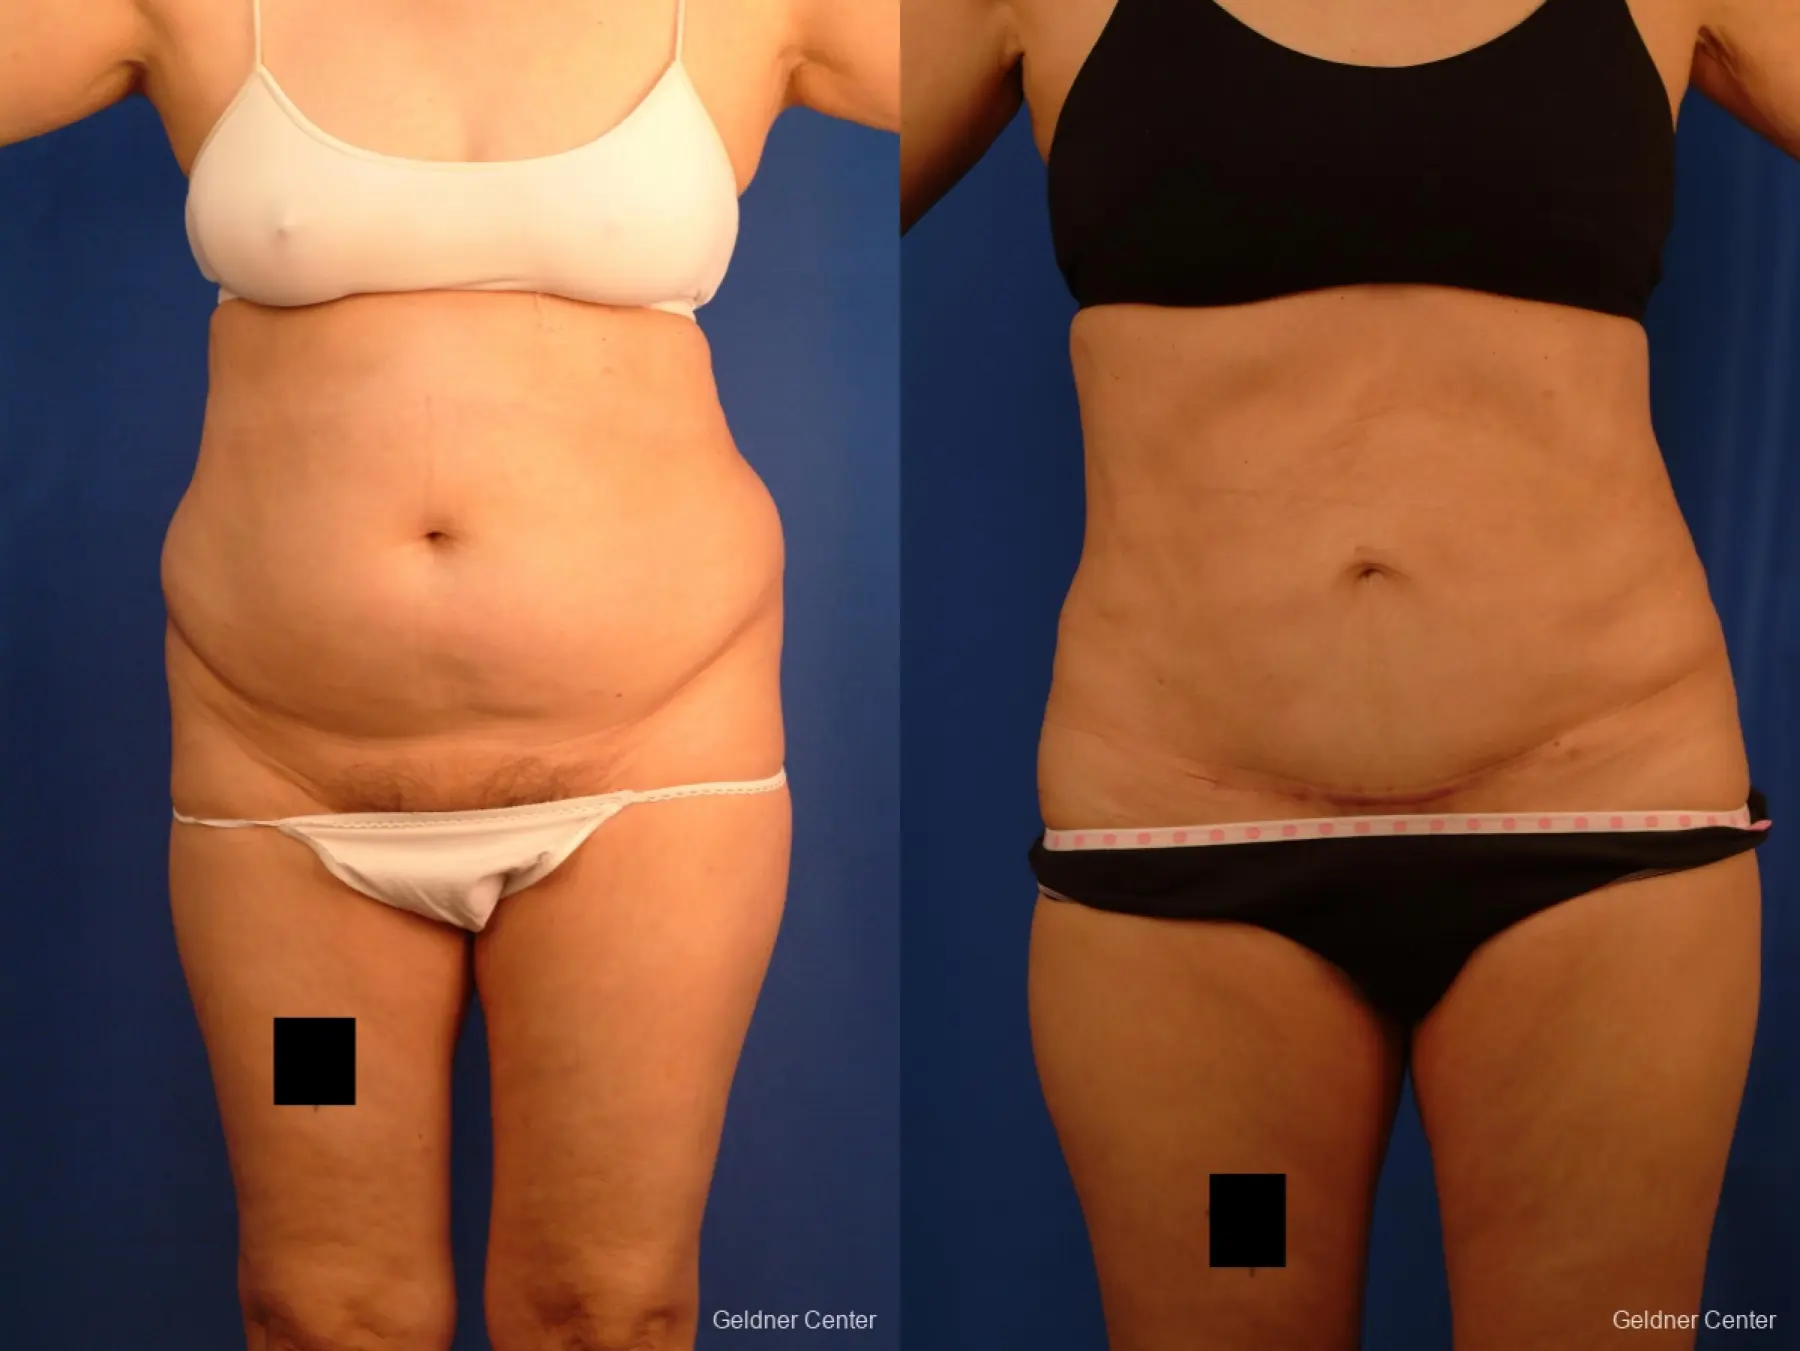 Vaser lipo patient 2536 before and after photos - Before and After 1